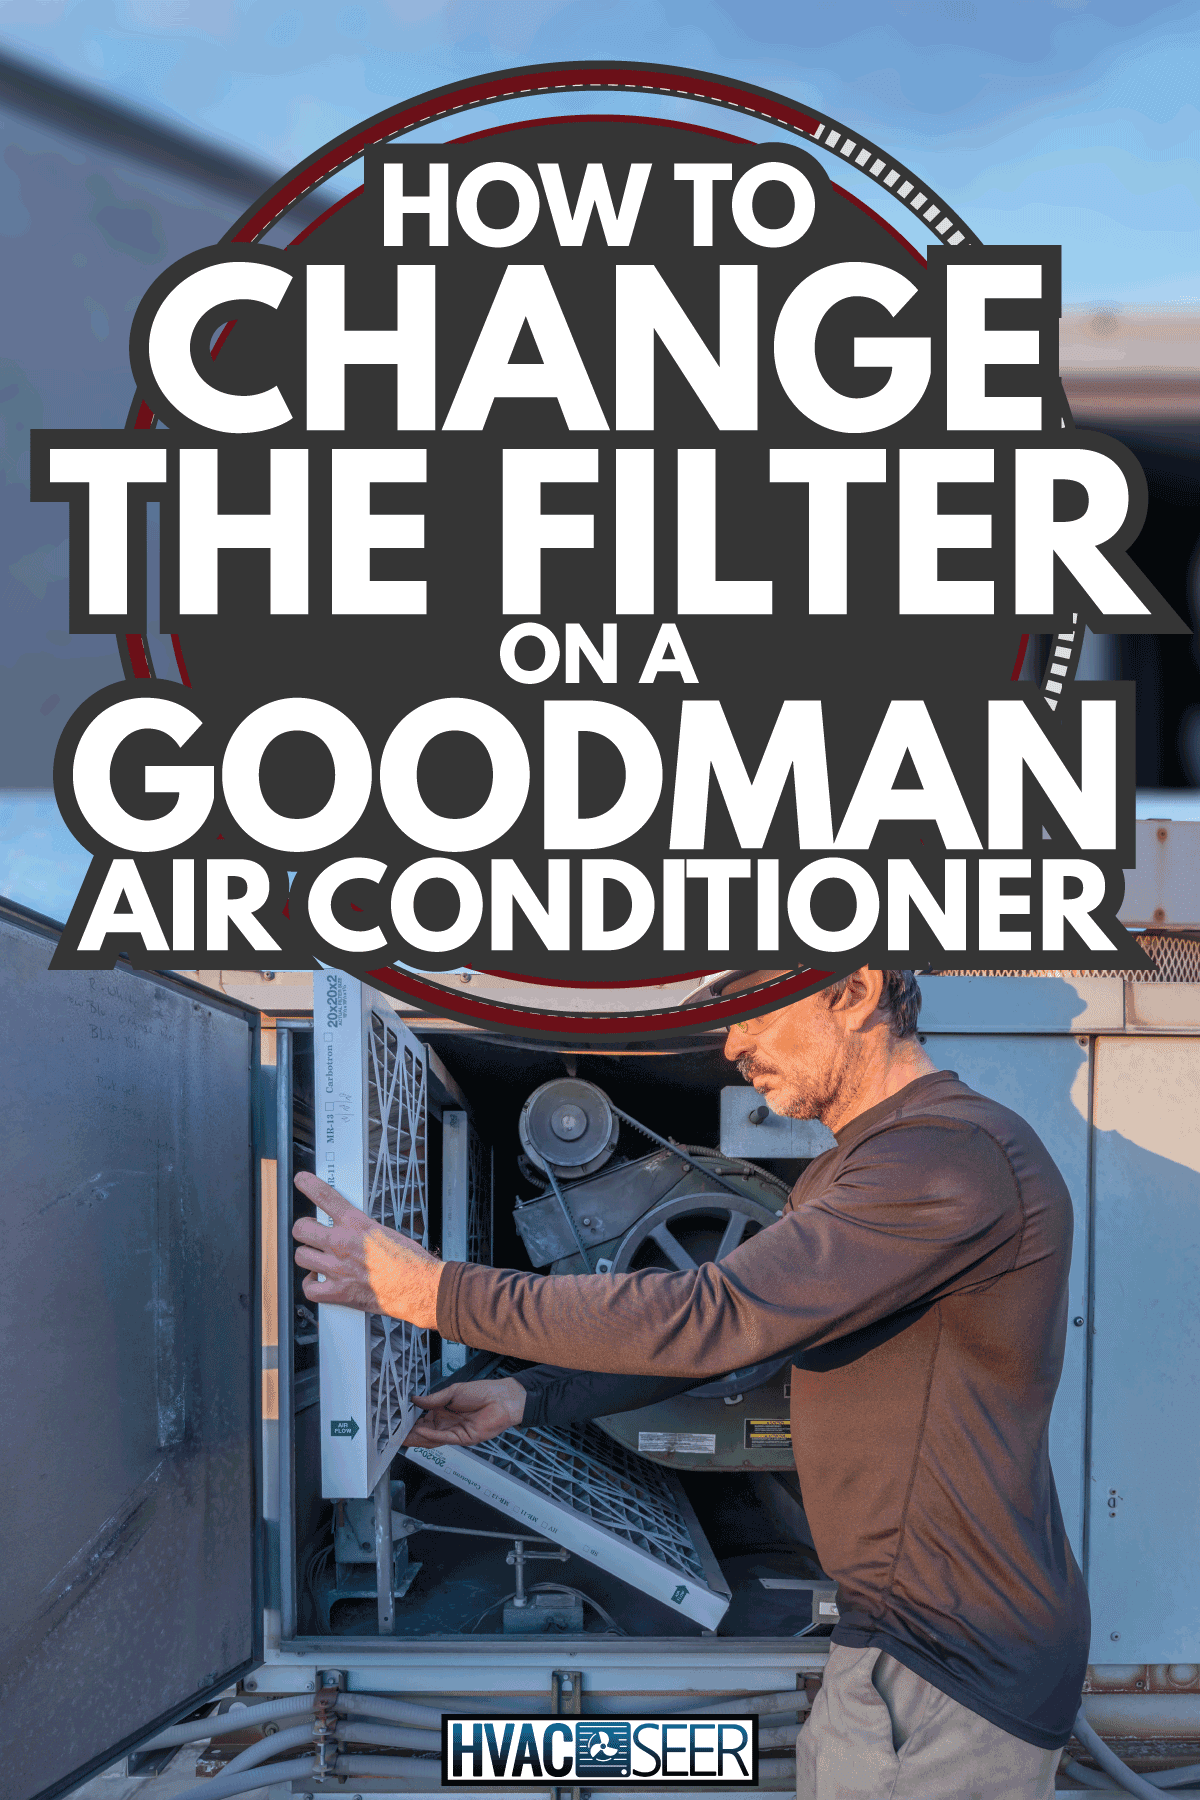 Preventative maintenance on a commercial roof top airconditioner. How To Change The Filter On A Goodman Air Conditioner